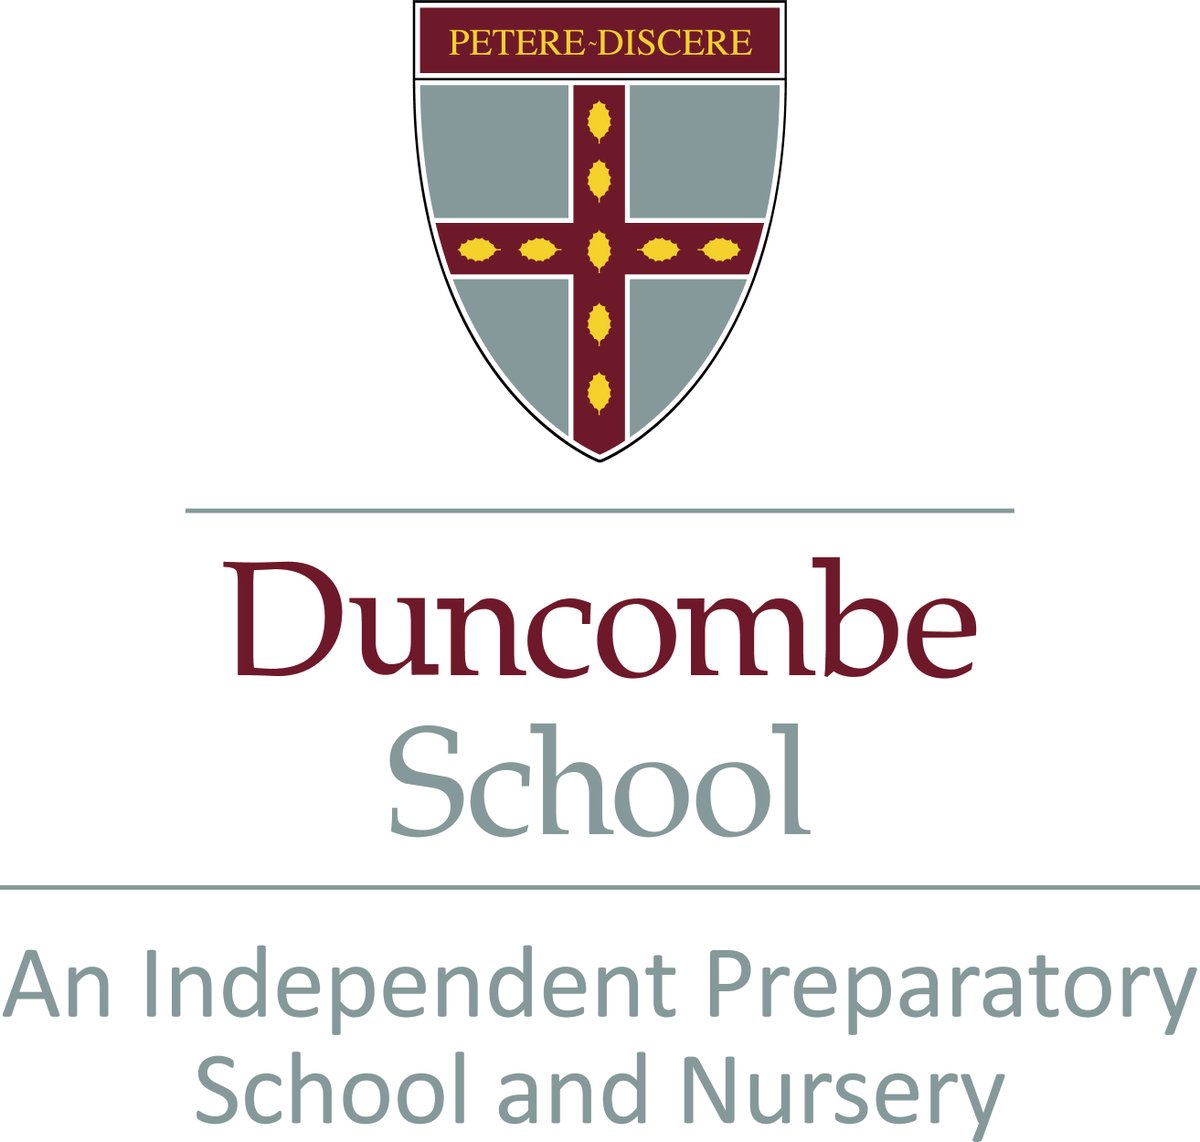 Even though school's out, our work continues. We're currently working on both digital and print versions of the Duncombe prospectus. Stay tuned for updates!

#Duncombe #DuncombeSchool #PersonalisedMarketing #EducationMarketing #SchoolPartnerships #UnifySchools #Unify